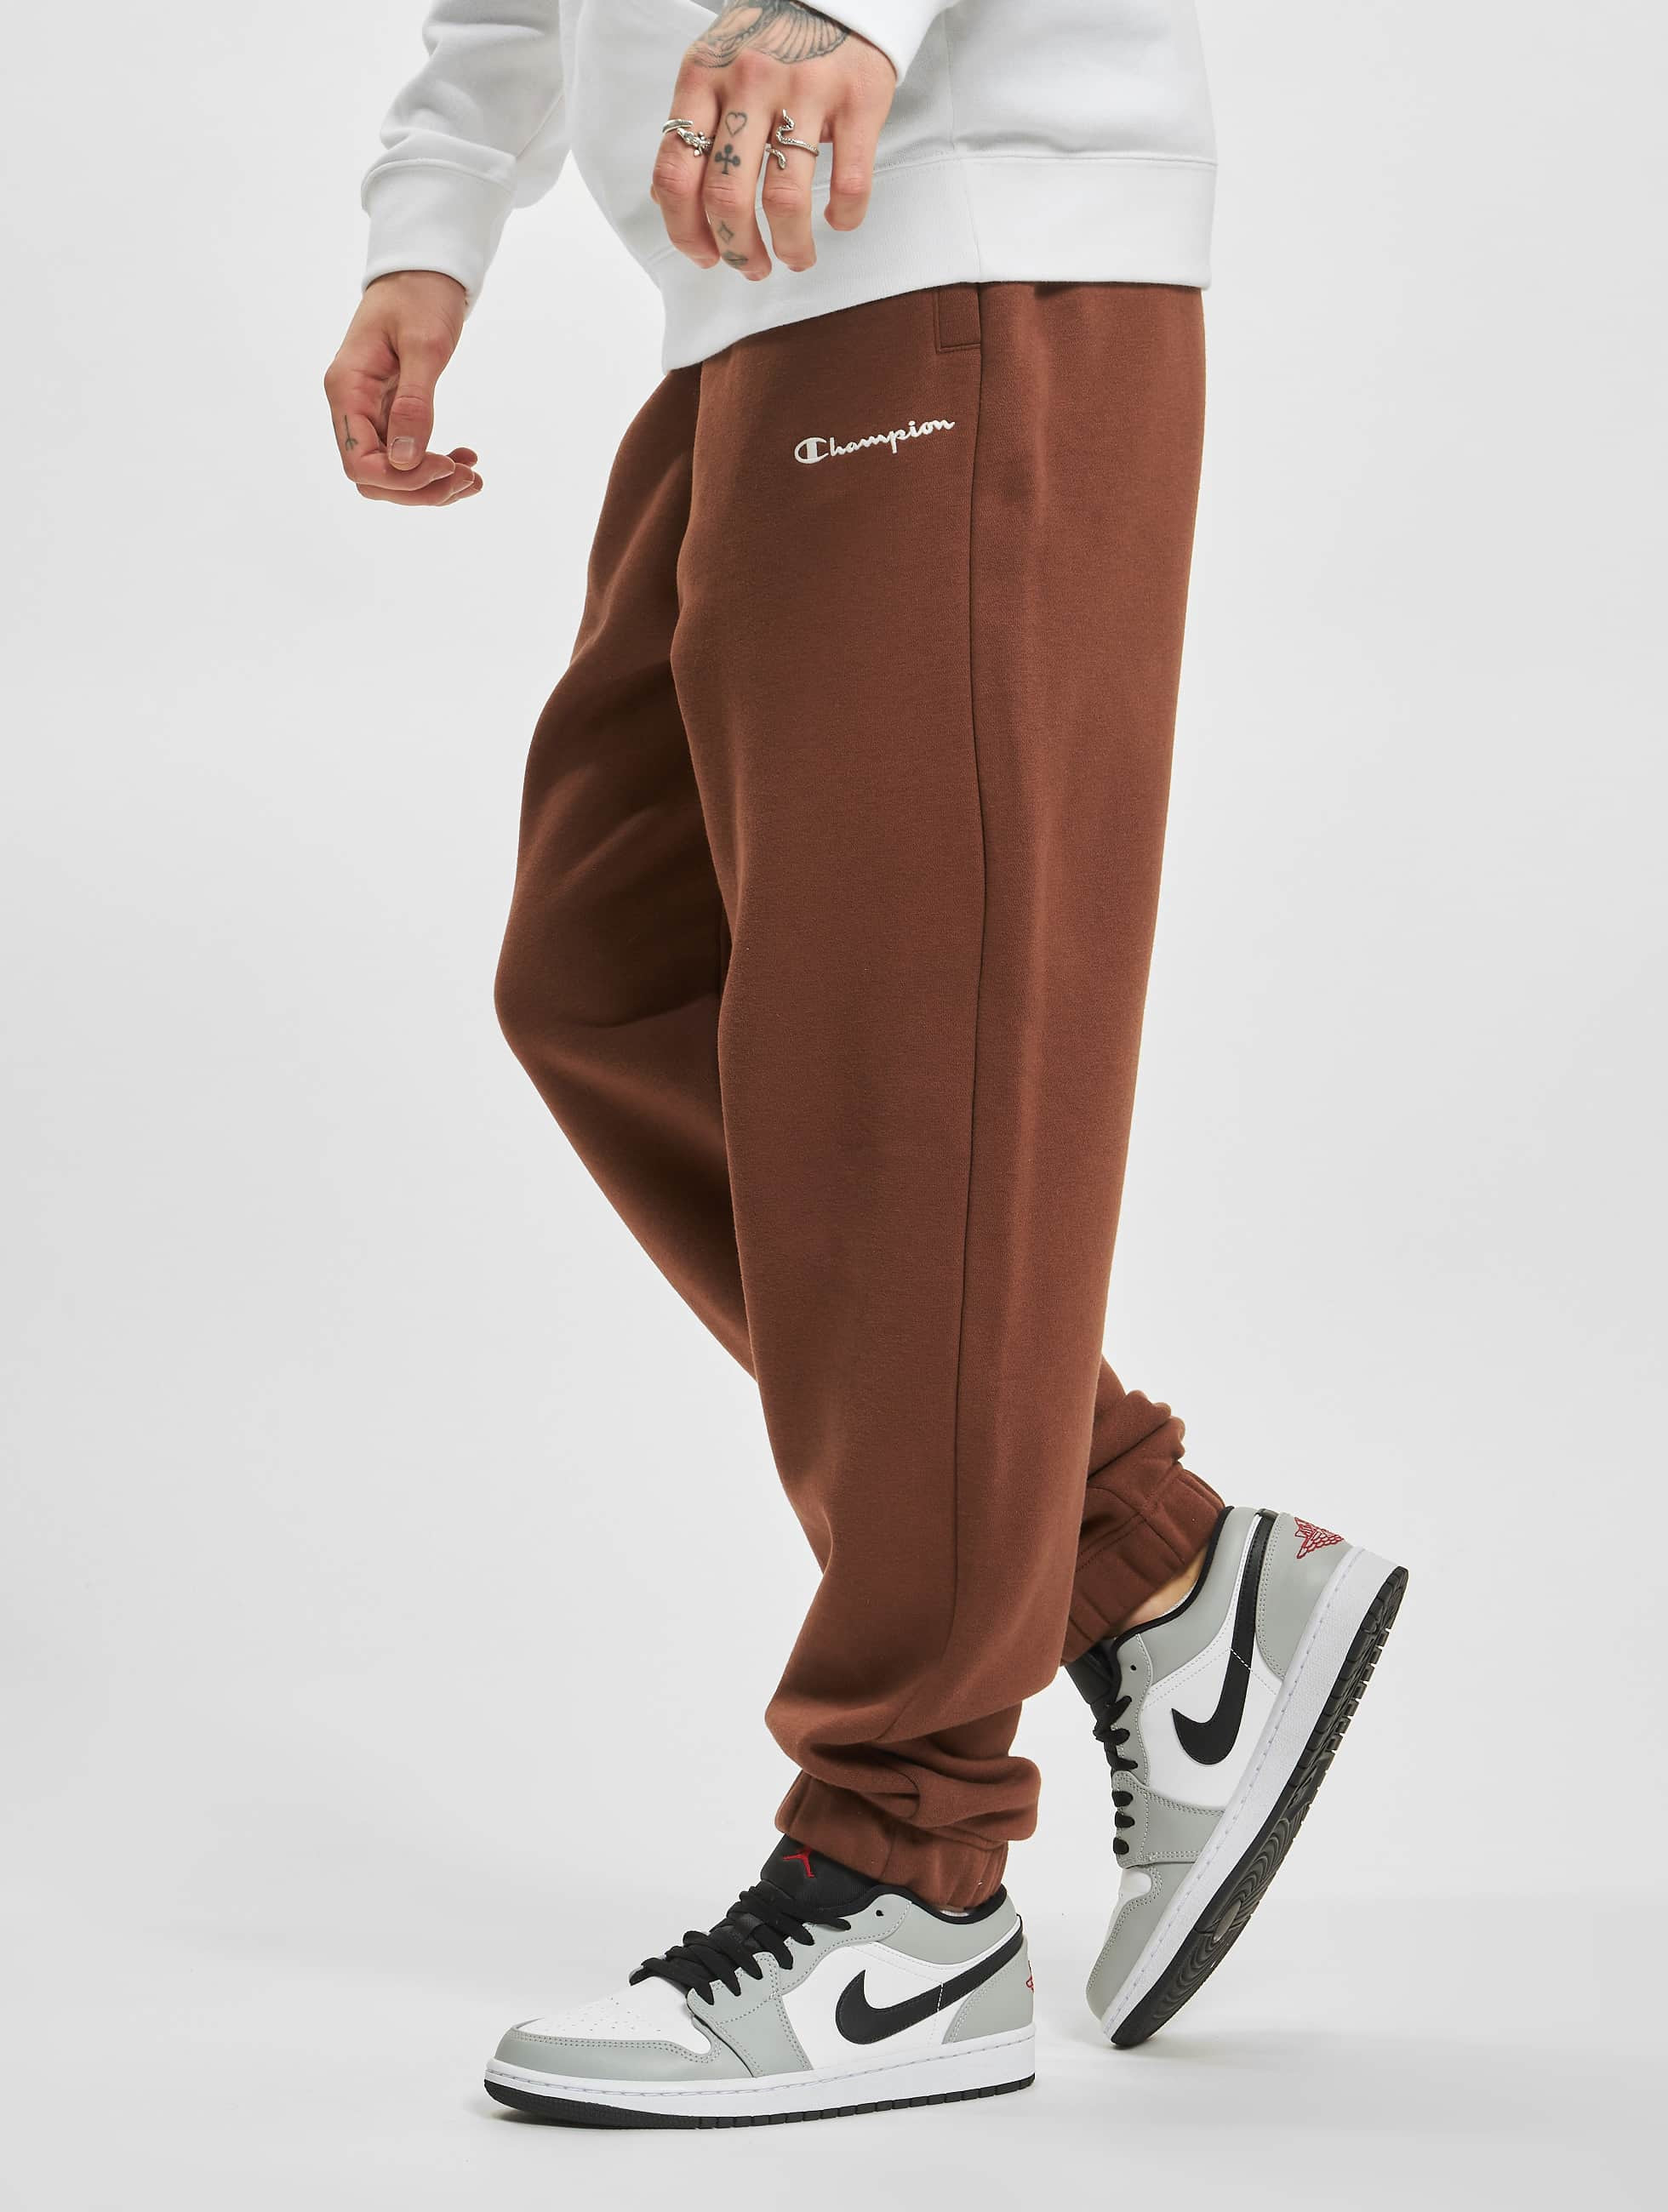 Rochester Pant / Sweat Pant Long in brown 941190